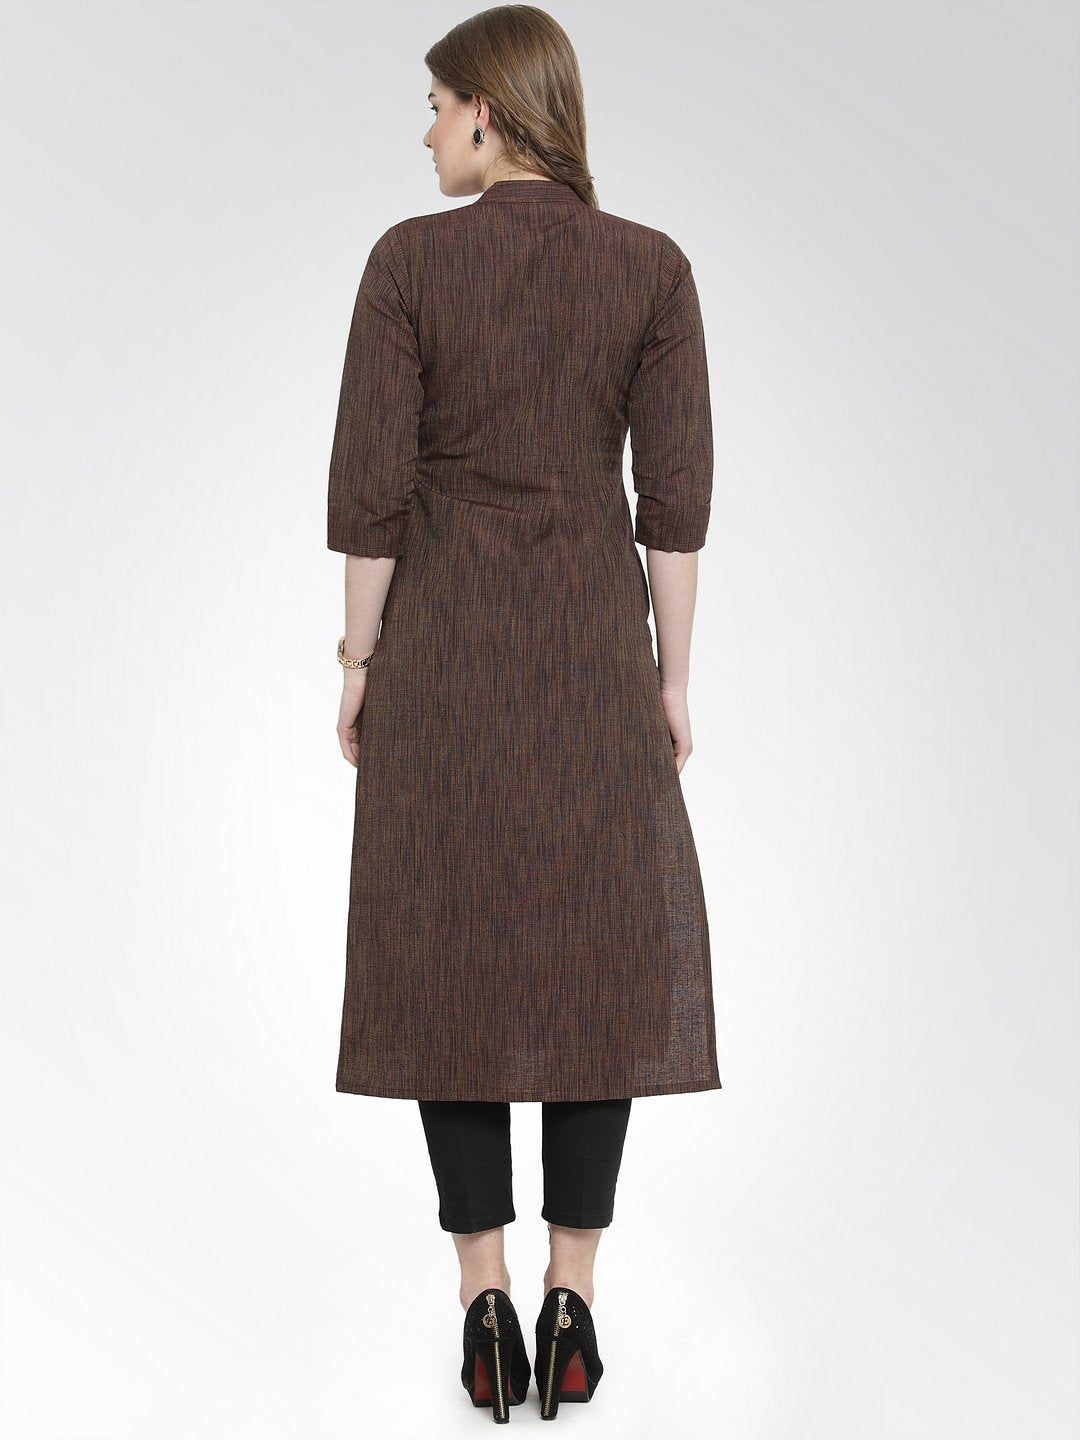 Buy Woolen Kurtis Online at Best Prices in India on Snapdeal